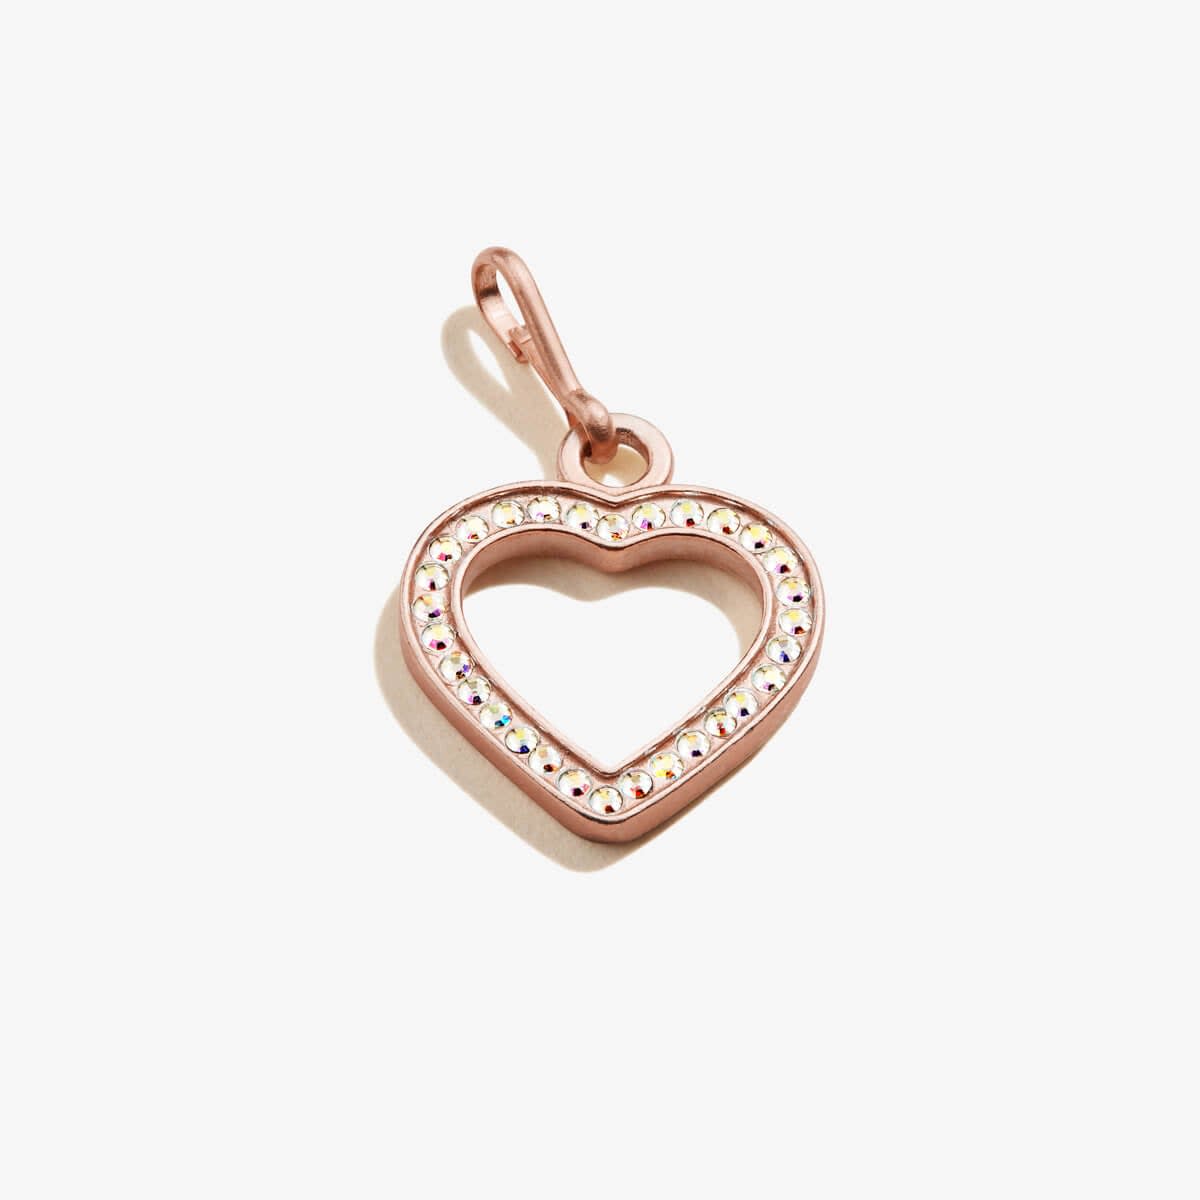 Pavé Heart Charm, 14kt Rose Gold Over Sterling Silver, Alex and Ani